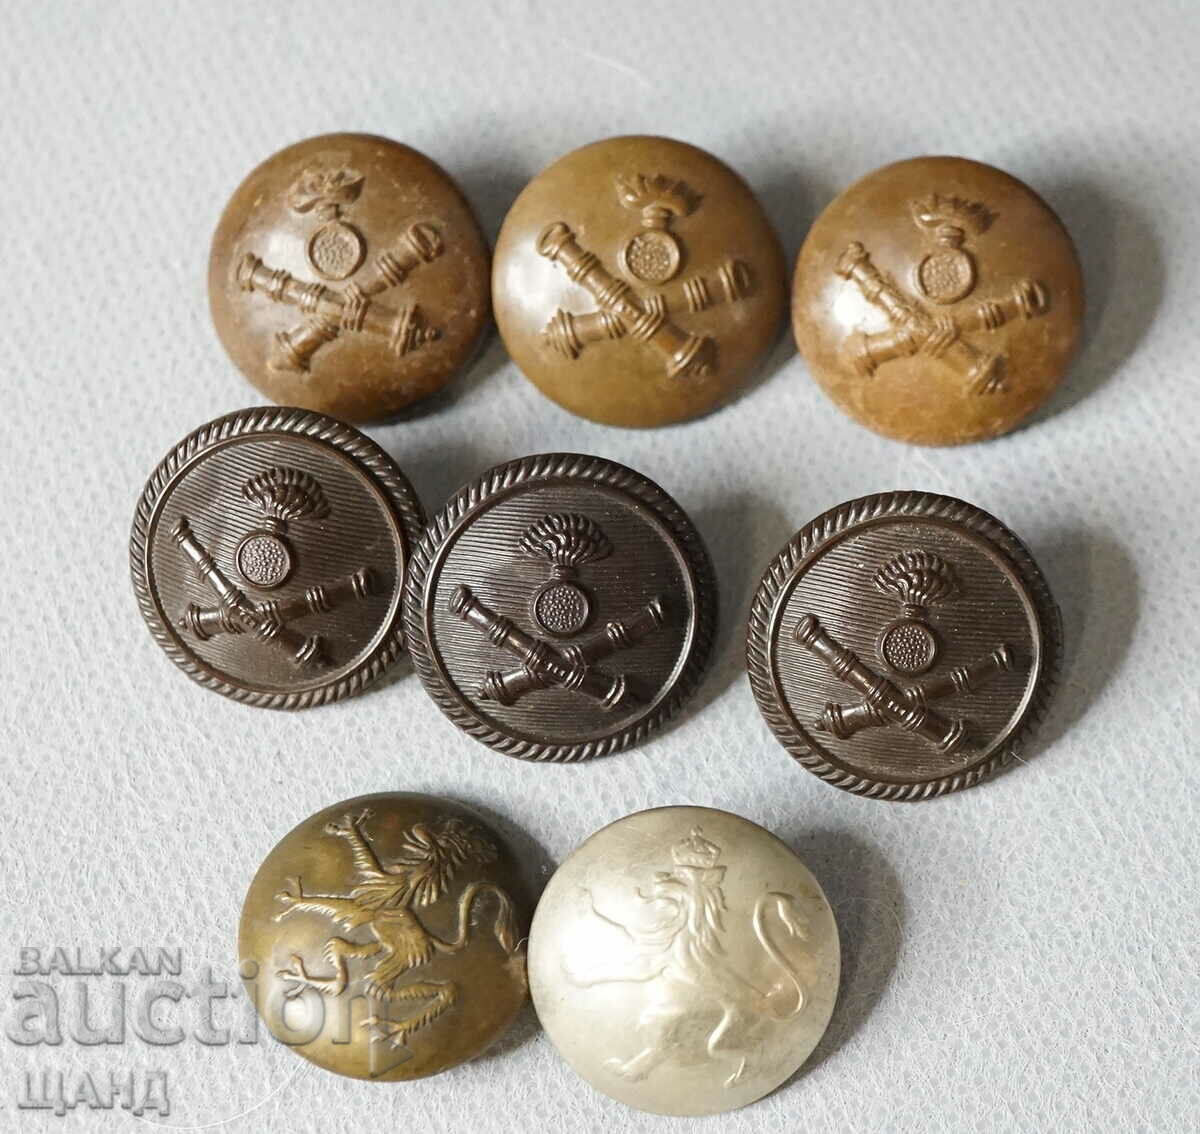 Kingdom of Bulgaria lot 8 buttons Officer's uniform